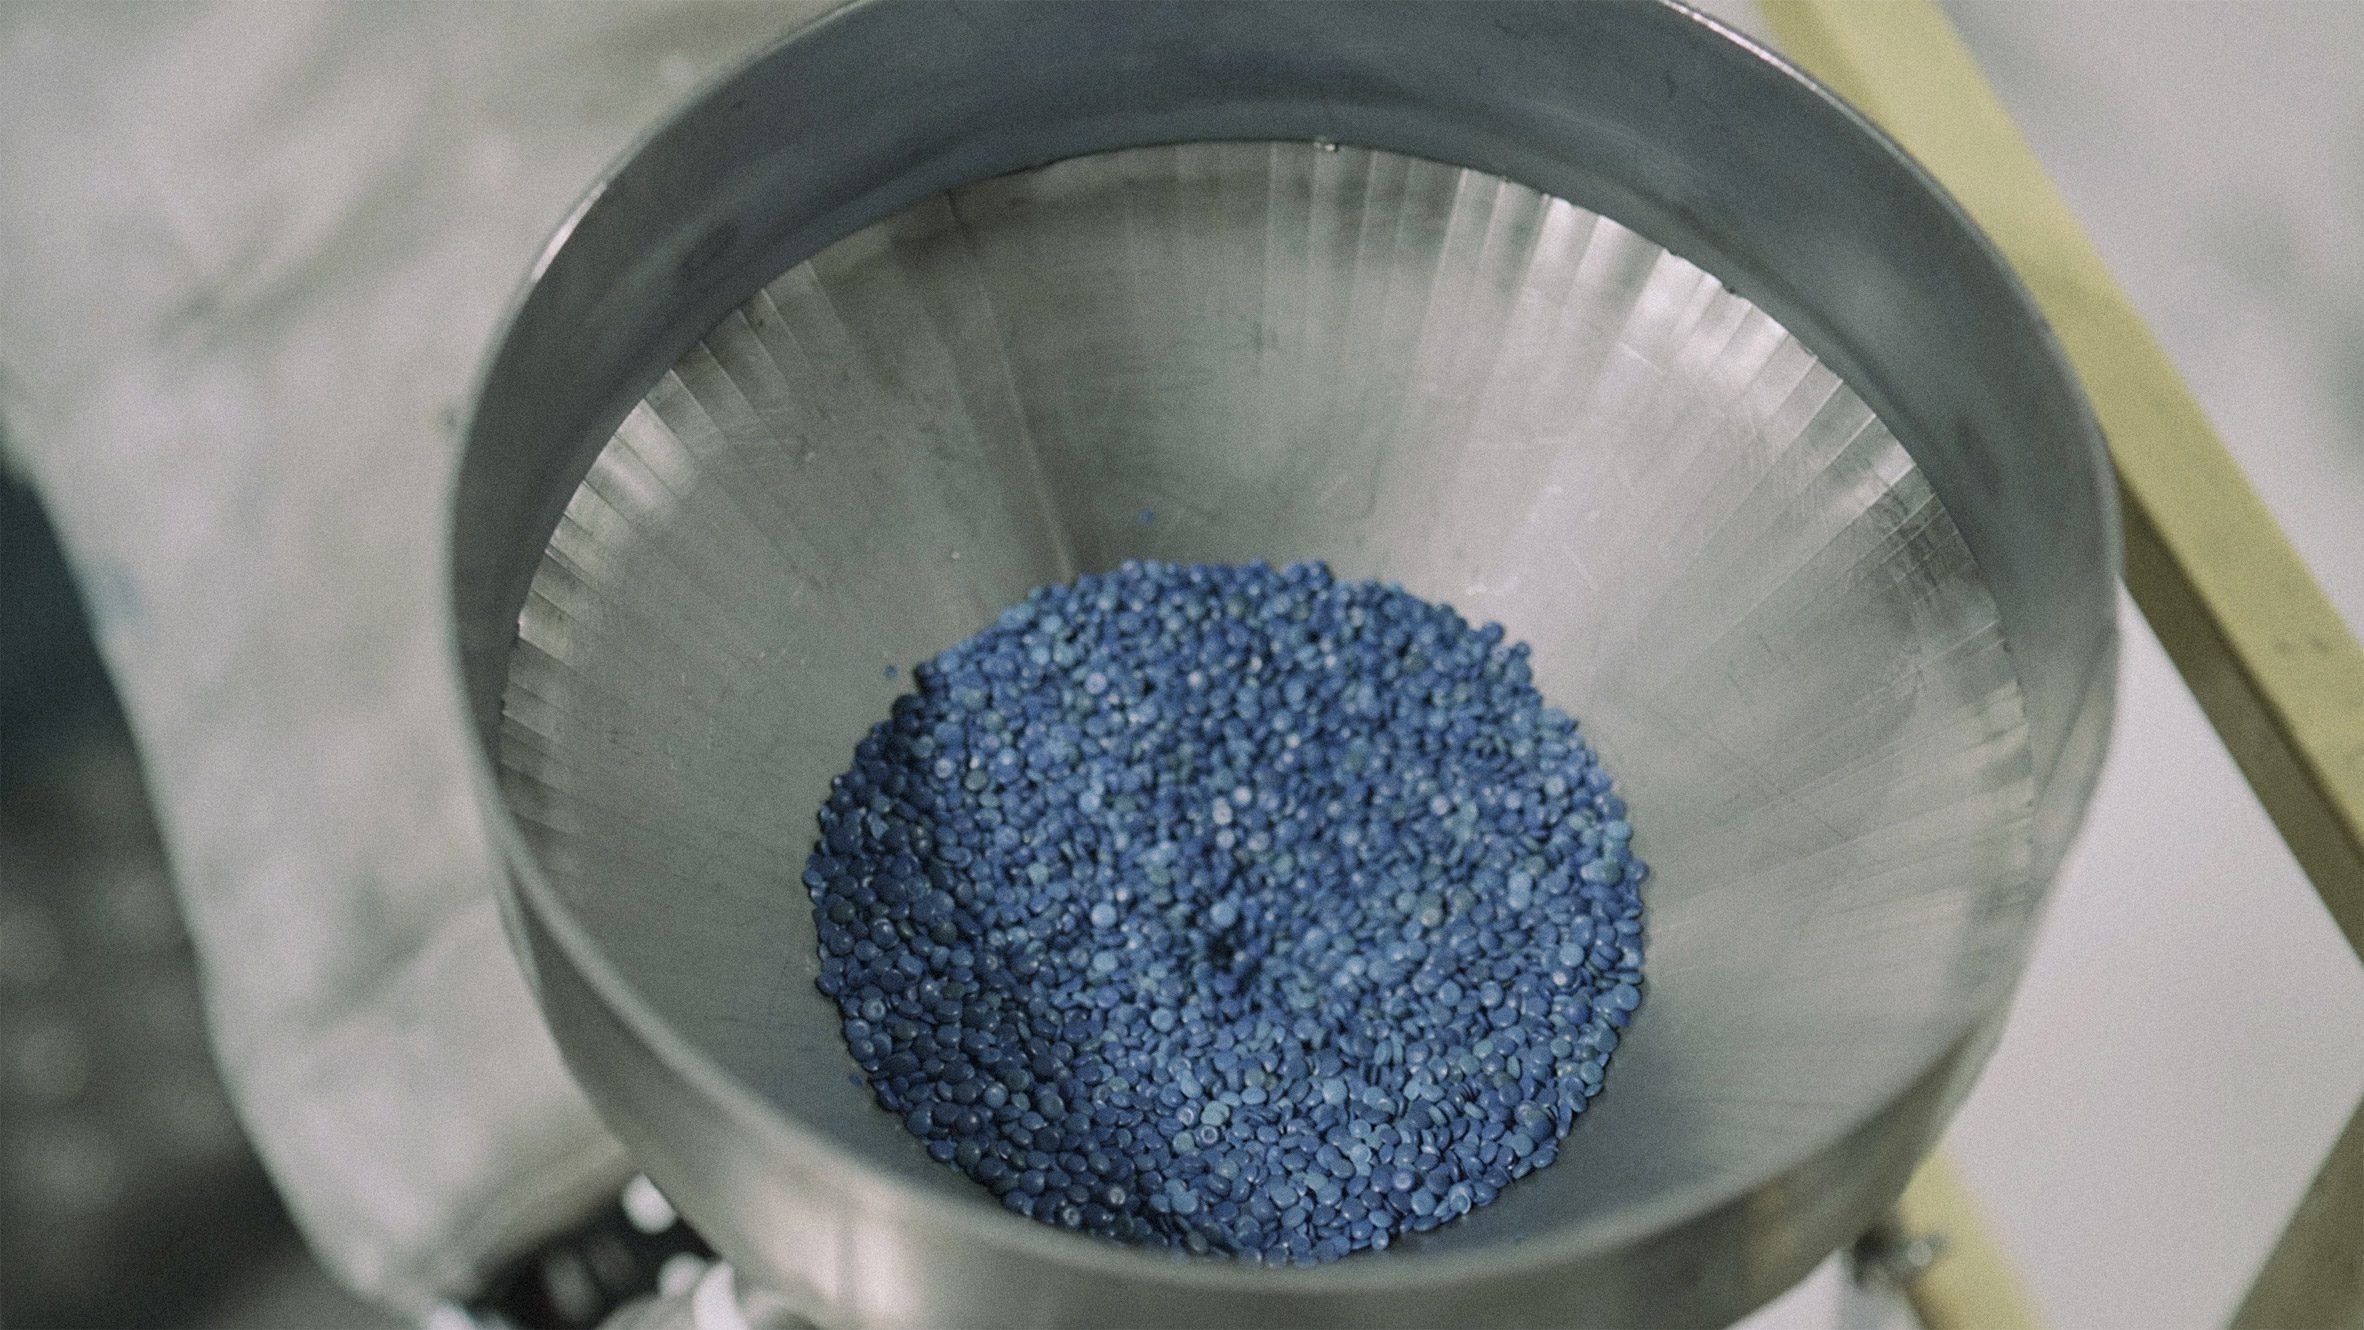 Photo of small, lentil-like blue pellets in a silver funnel